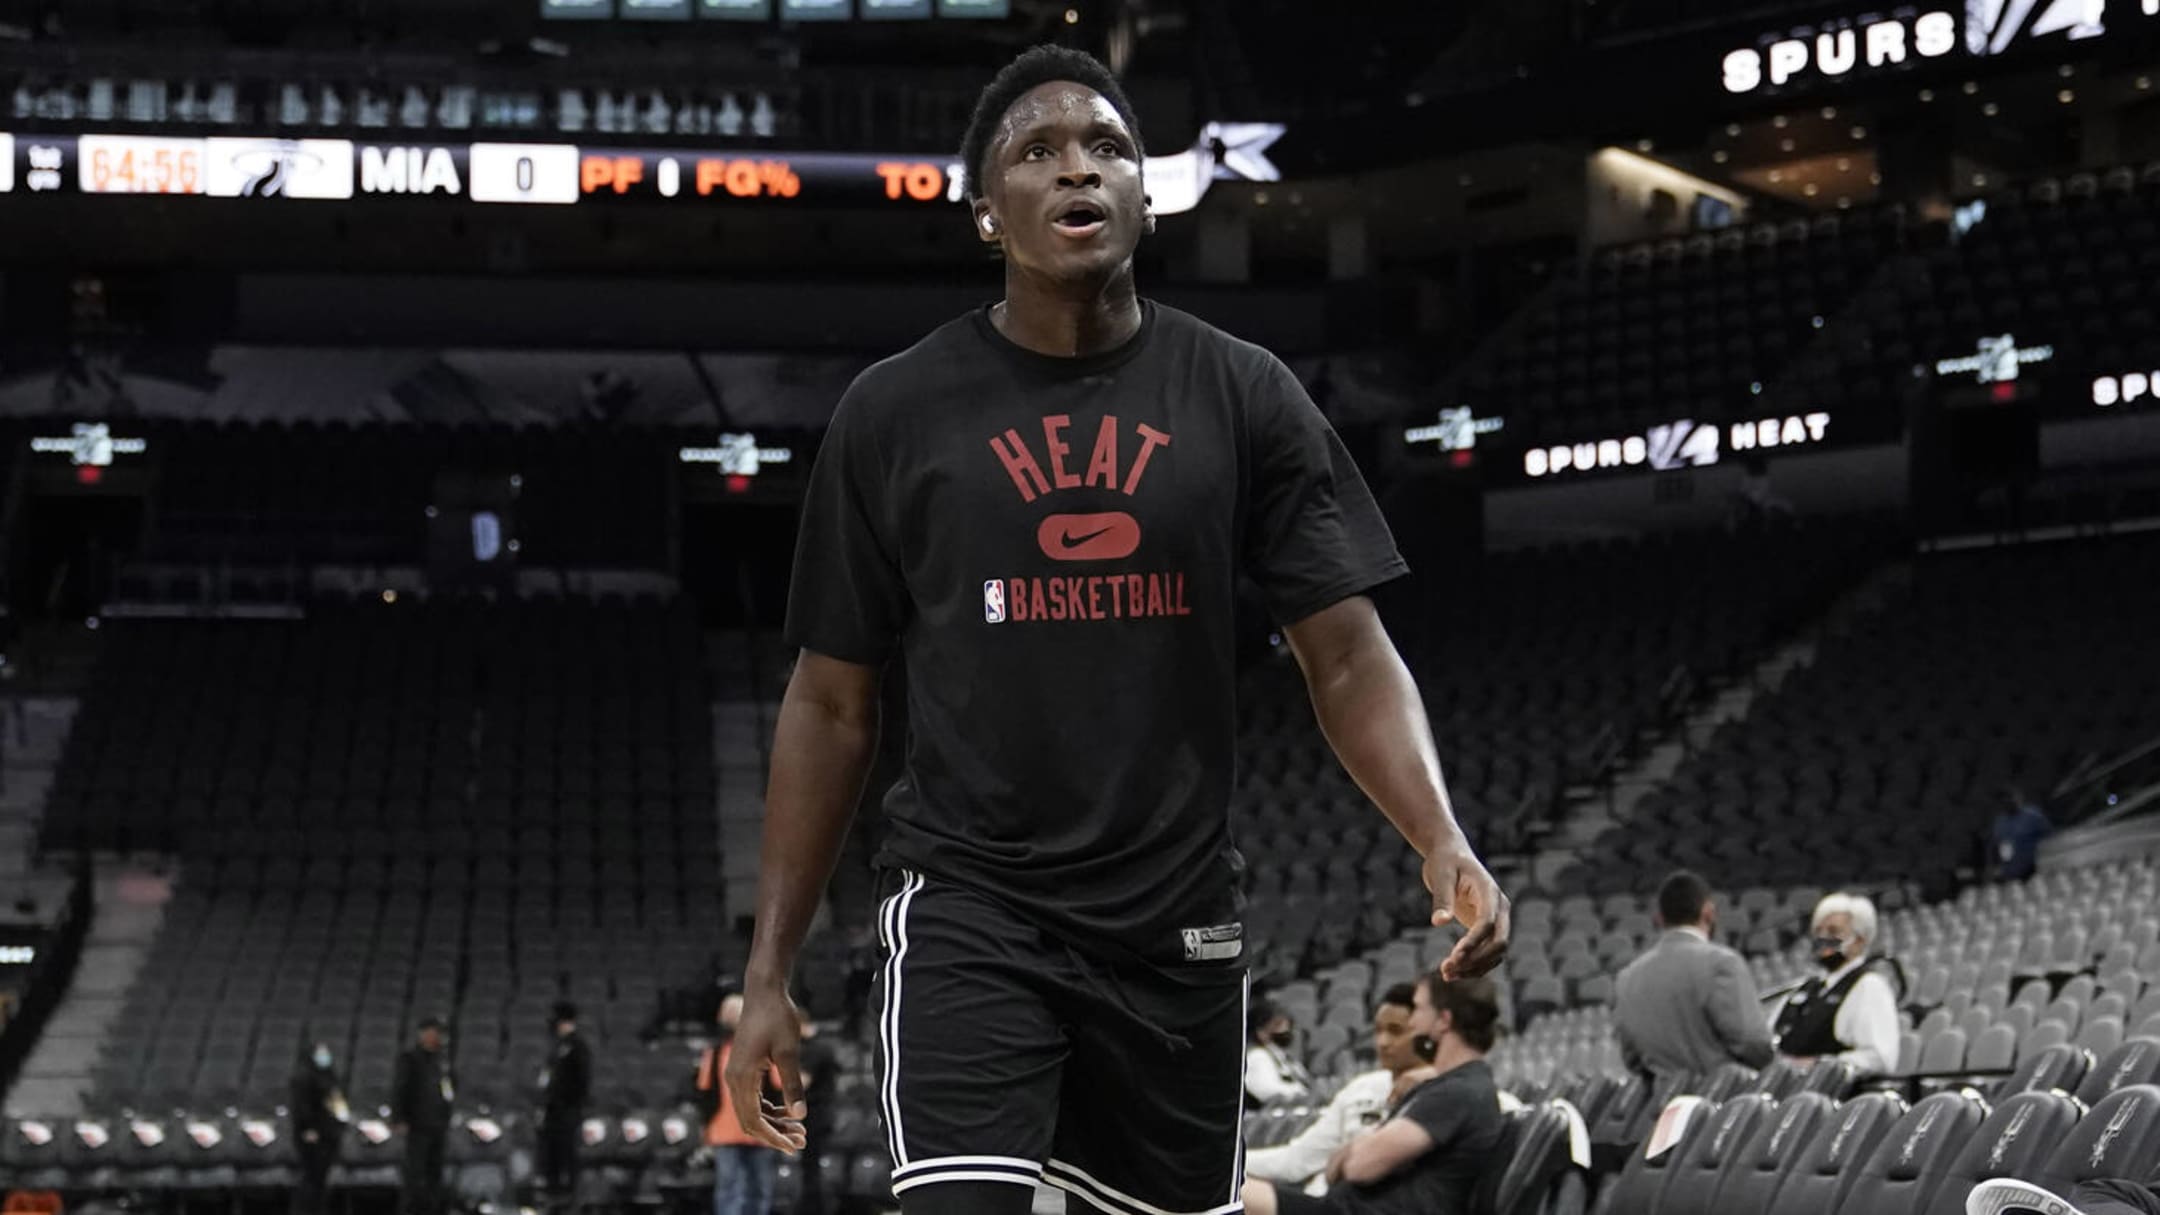 Erik Spoelstra: 'I Do Not Have a Timeline' For Victor Oladipo's